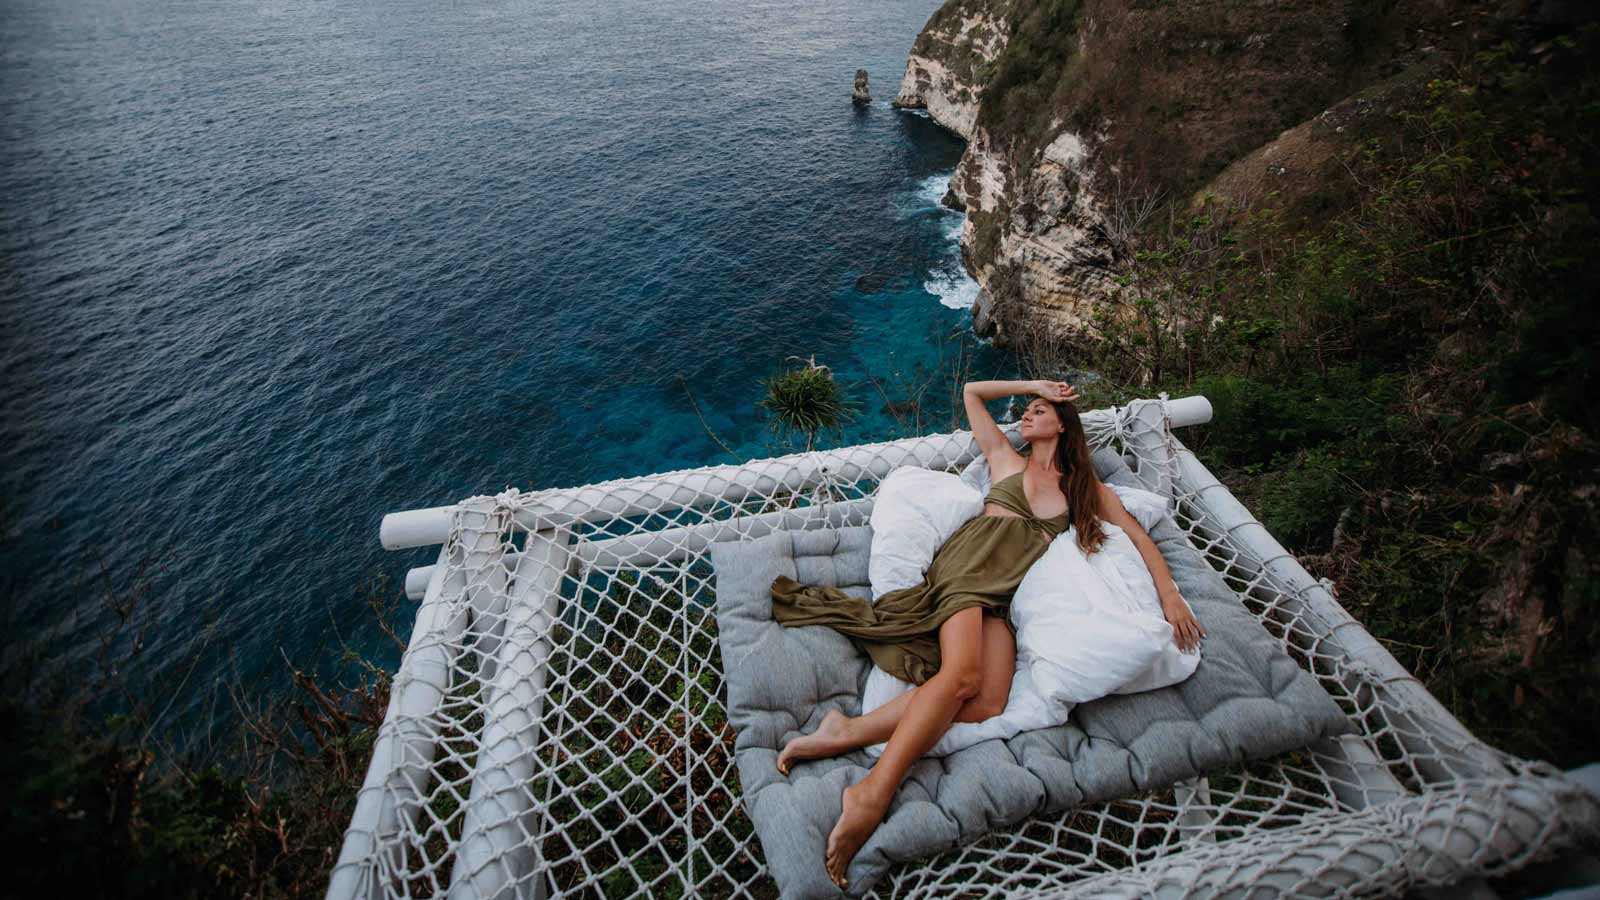 Terrifying 'Clifftop Bungalow' In Bali Has Travellers Losing Their Minds